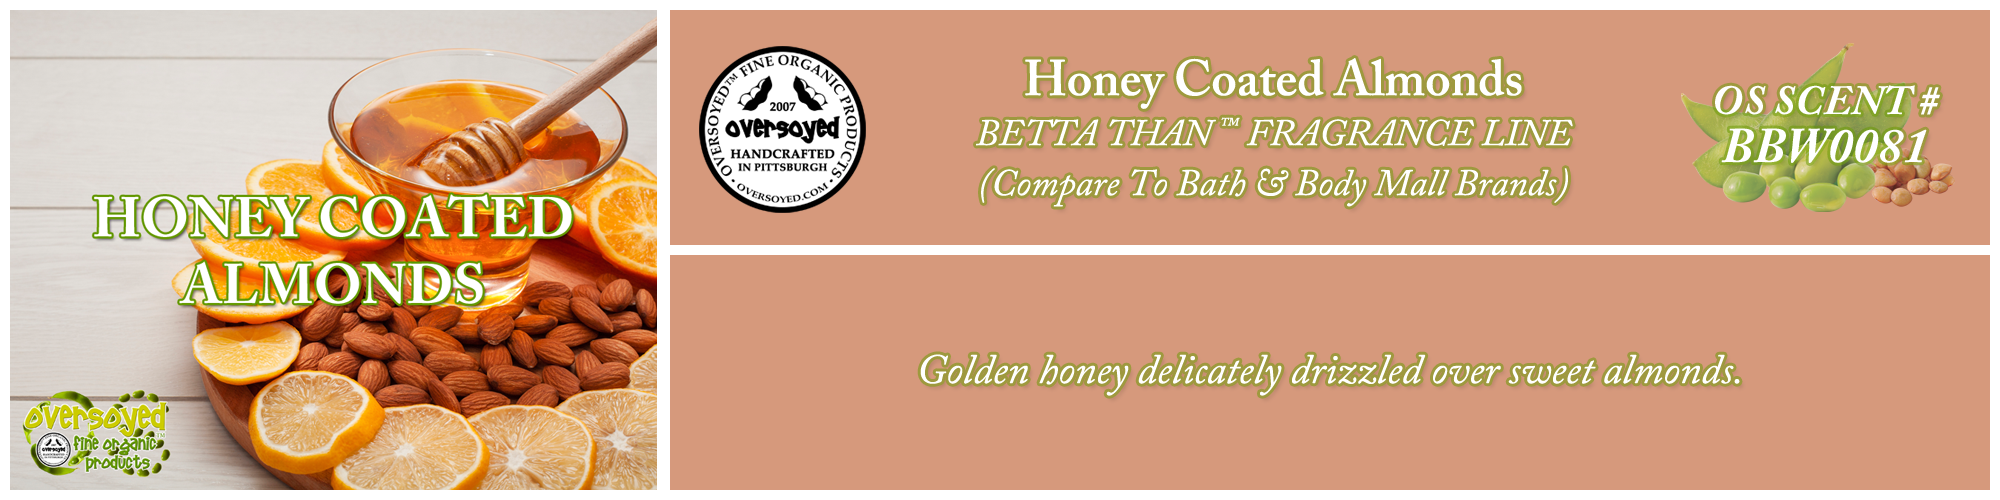 Honey Coated Almonds Handcrafted Products Collection